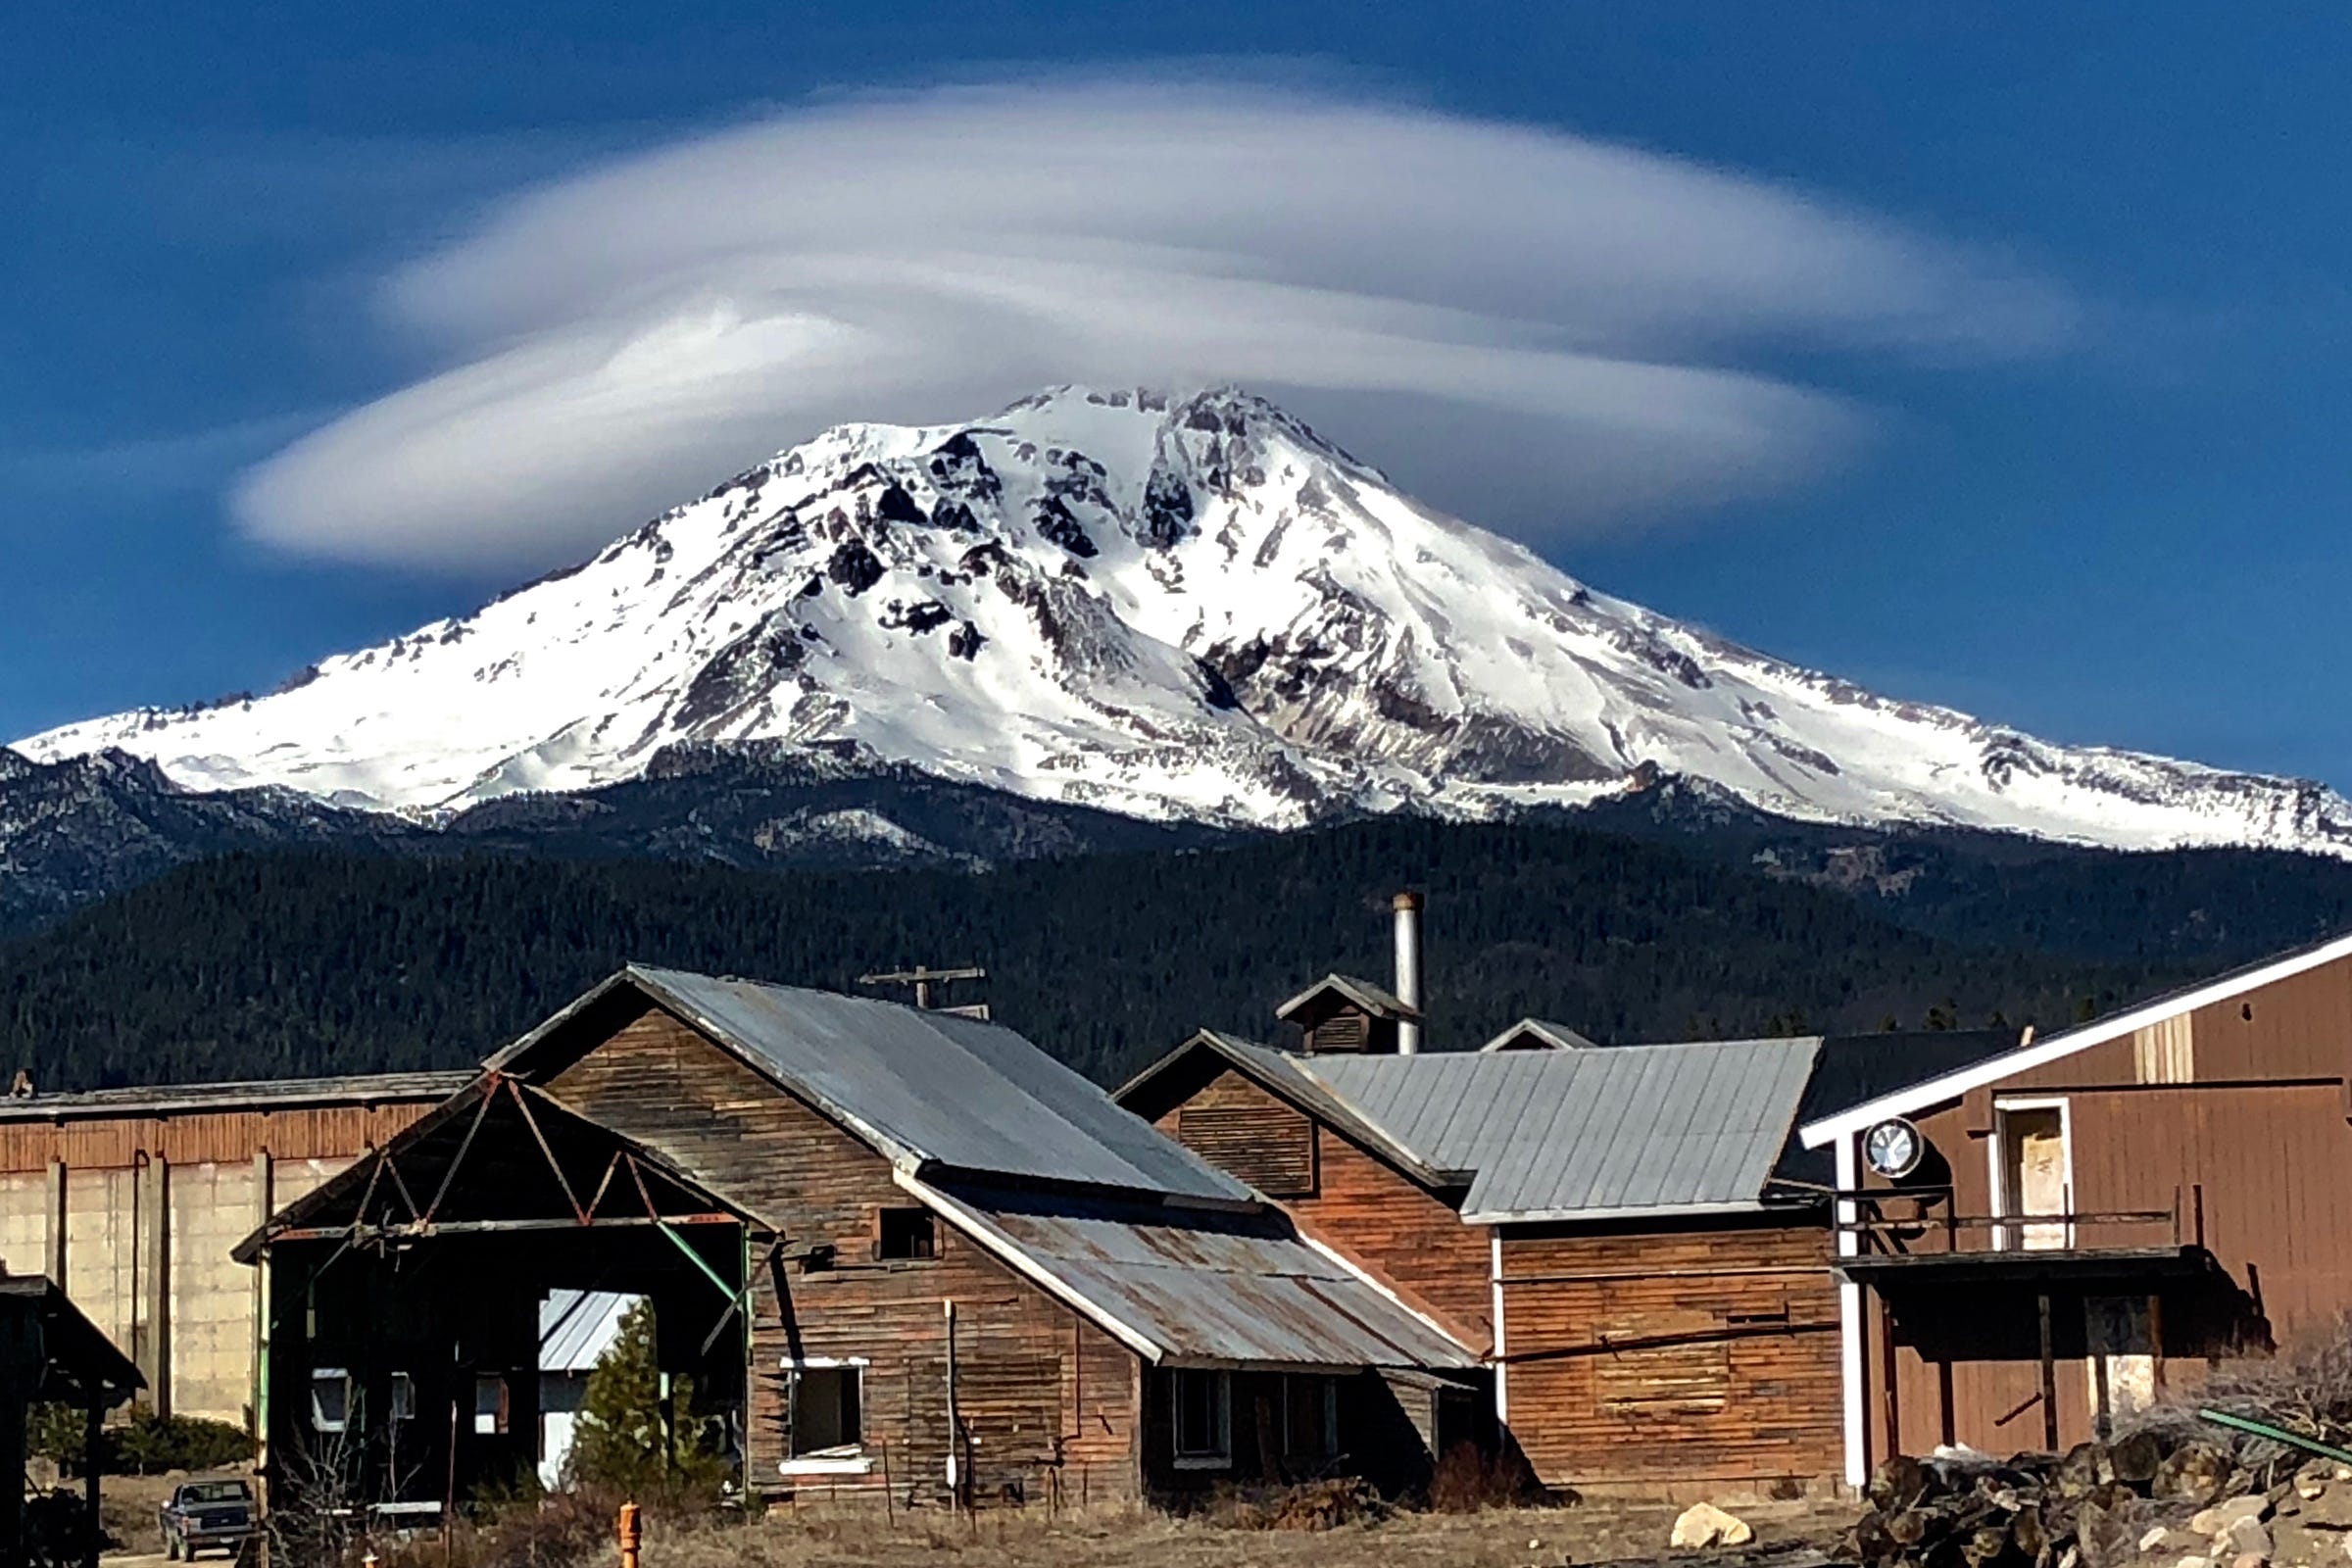 A lenticular cloud as seen from McCloud in February of 2018.